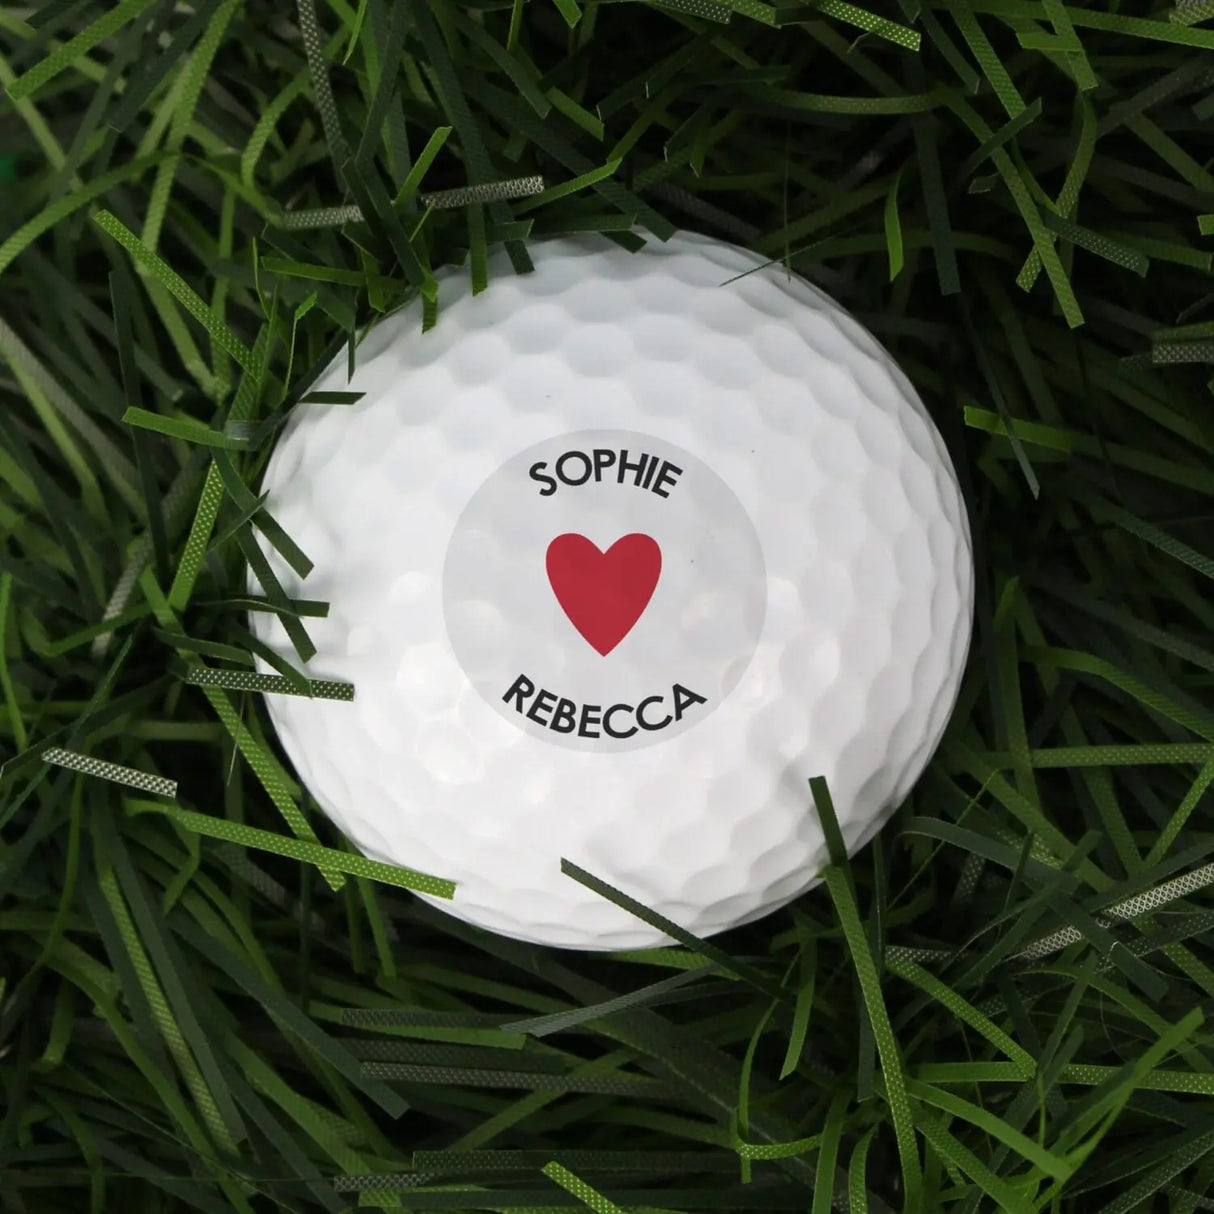 Personalised Heart Golf Ball - Gift Moments